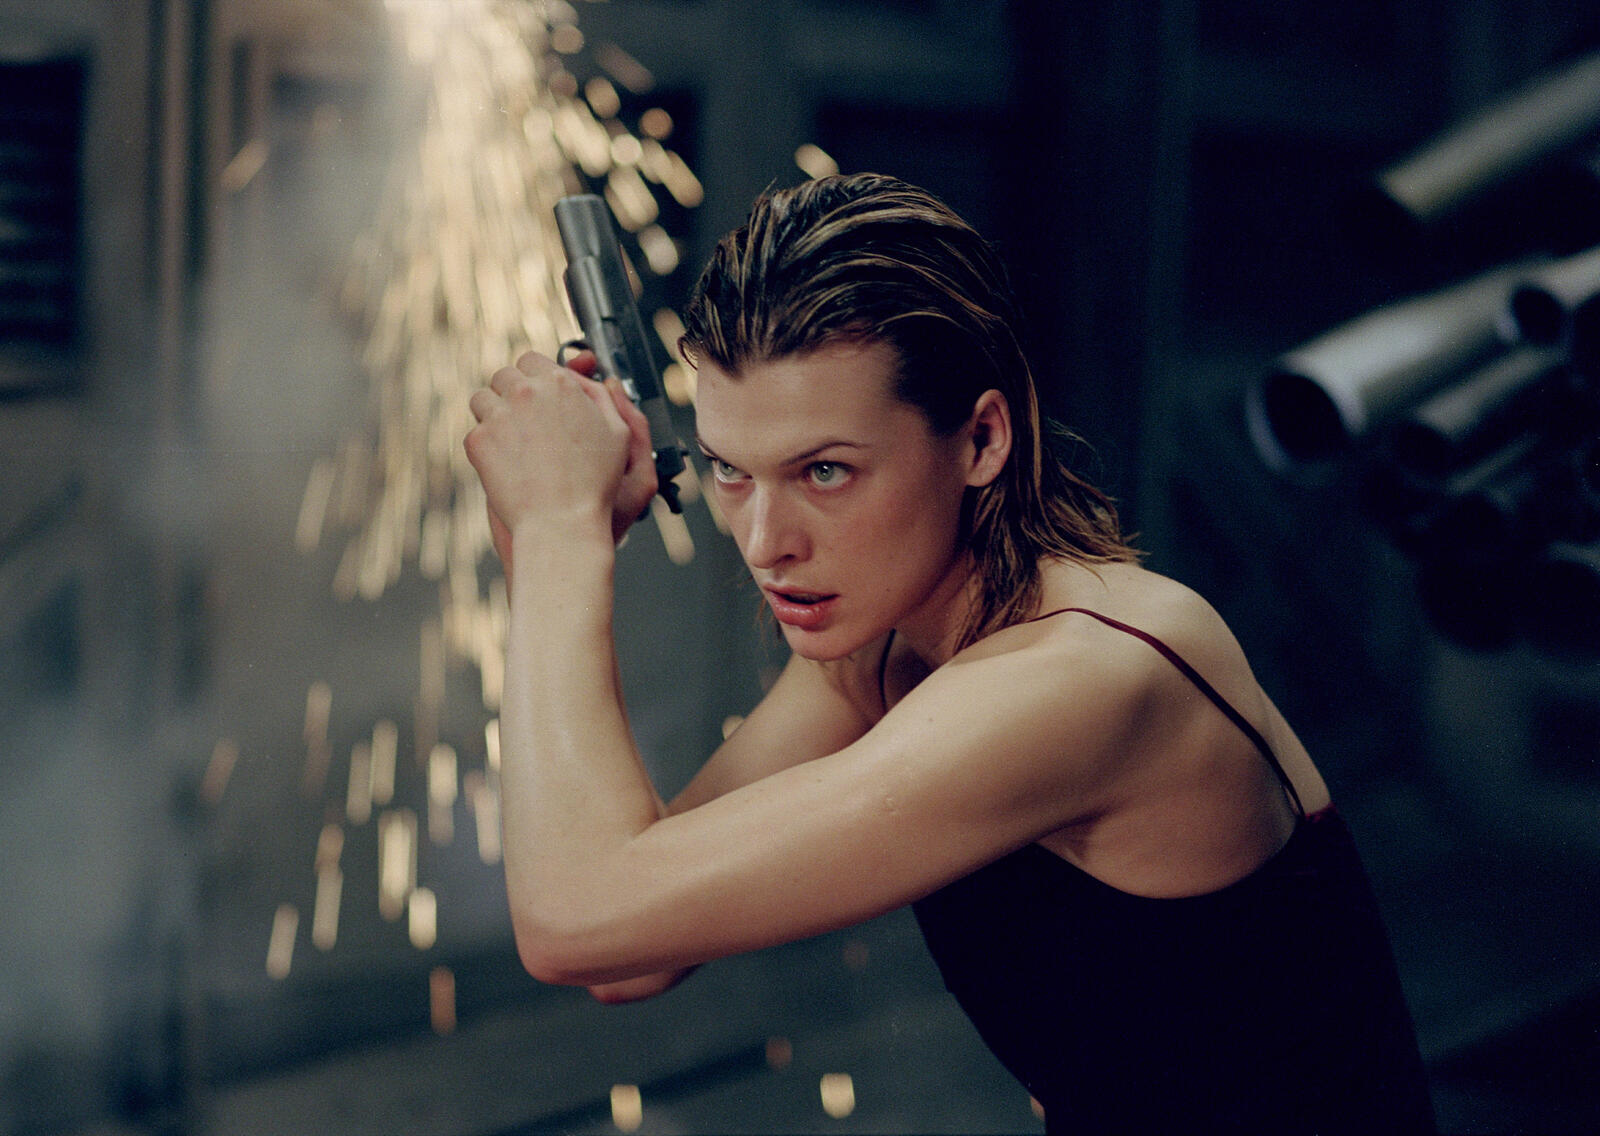 Wallpapers Milla Jovovich movies Resident Evil on the desktop